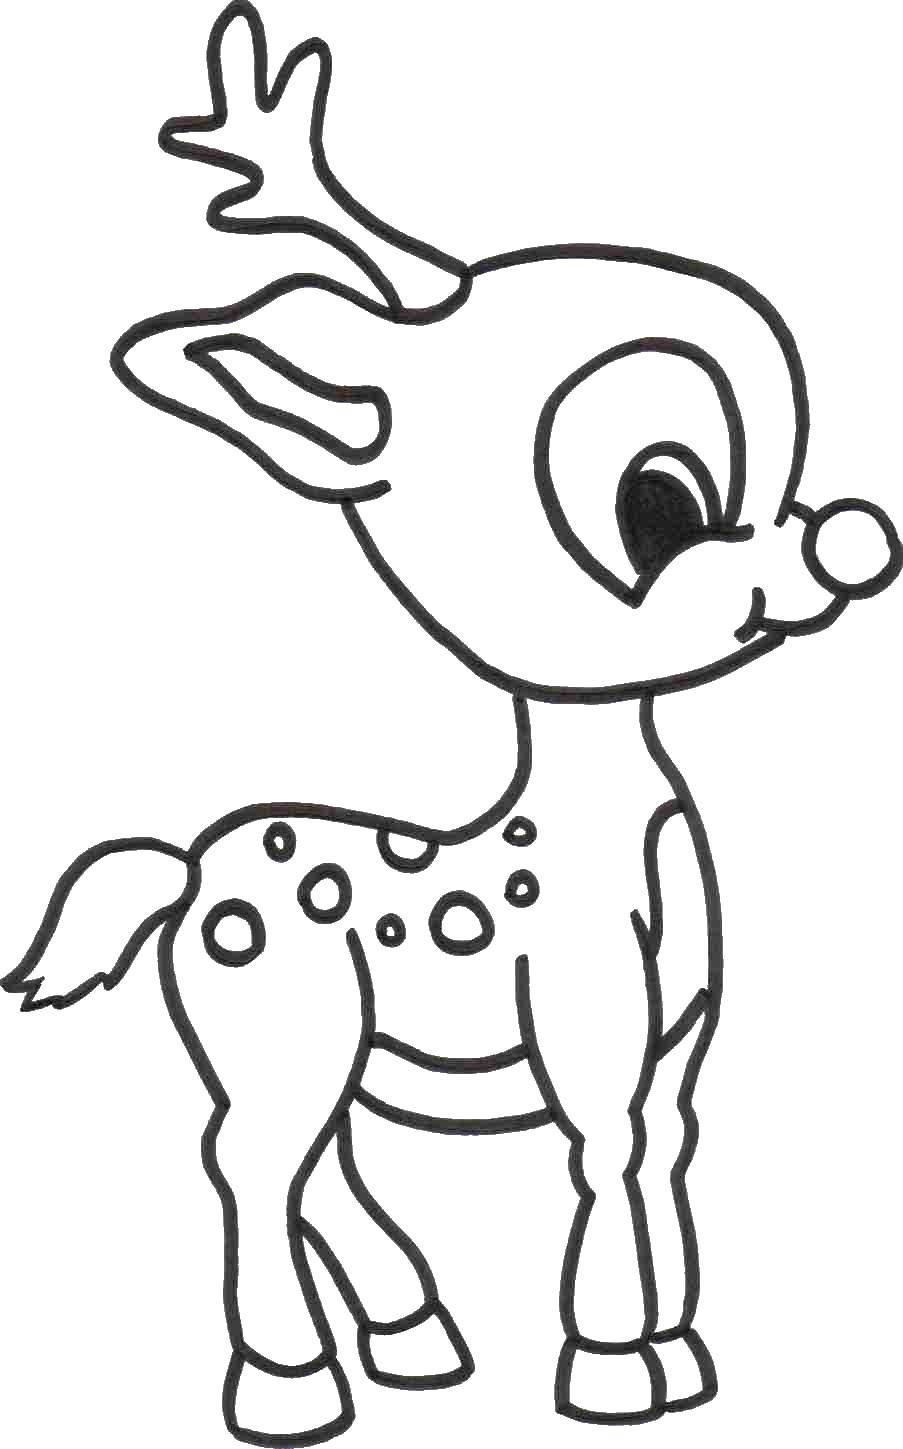 Coloring Deer. Category Christmas. Tags:  the deer, animals.